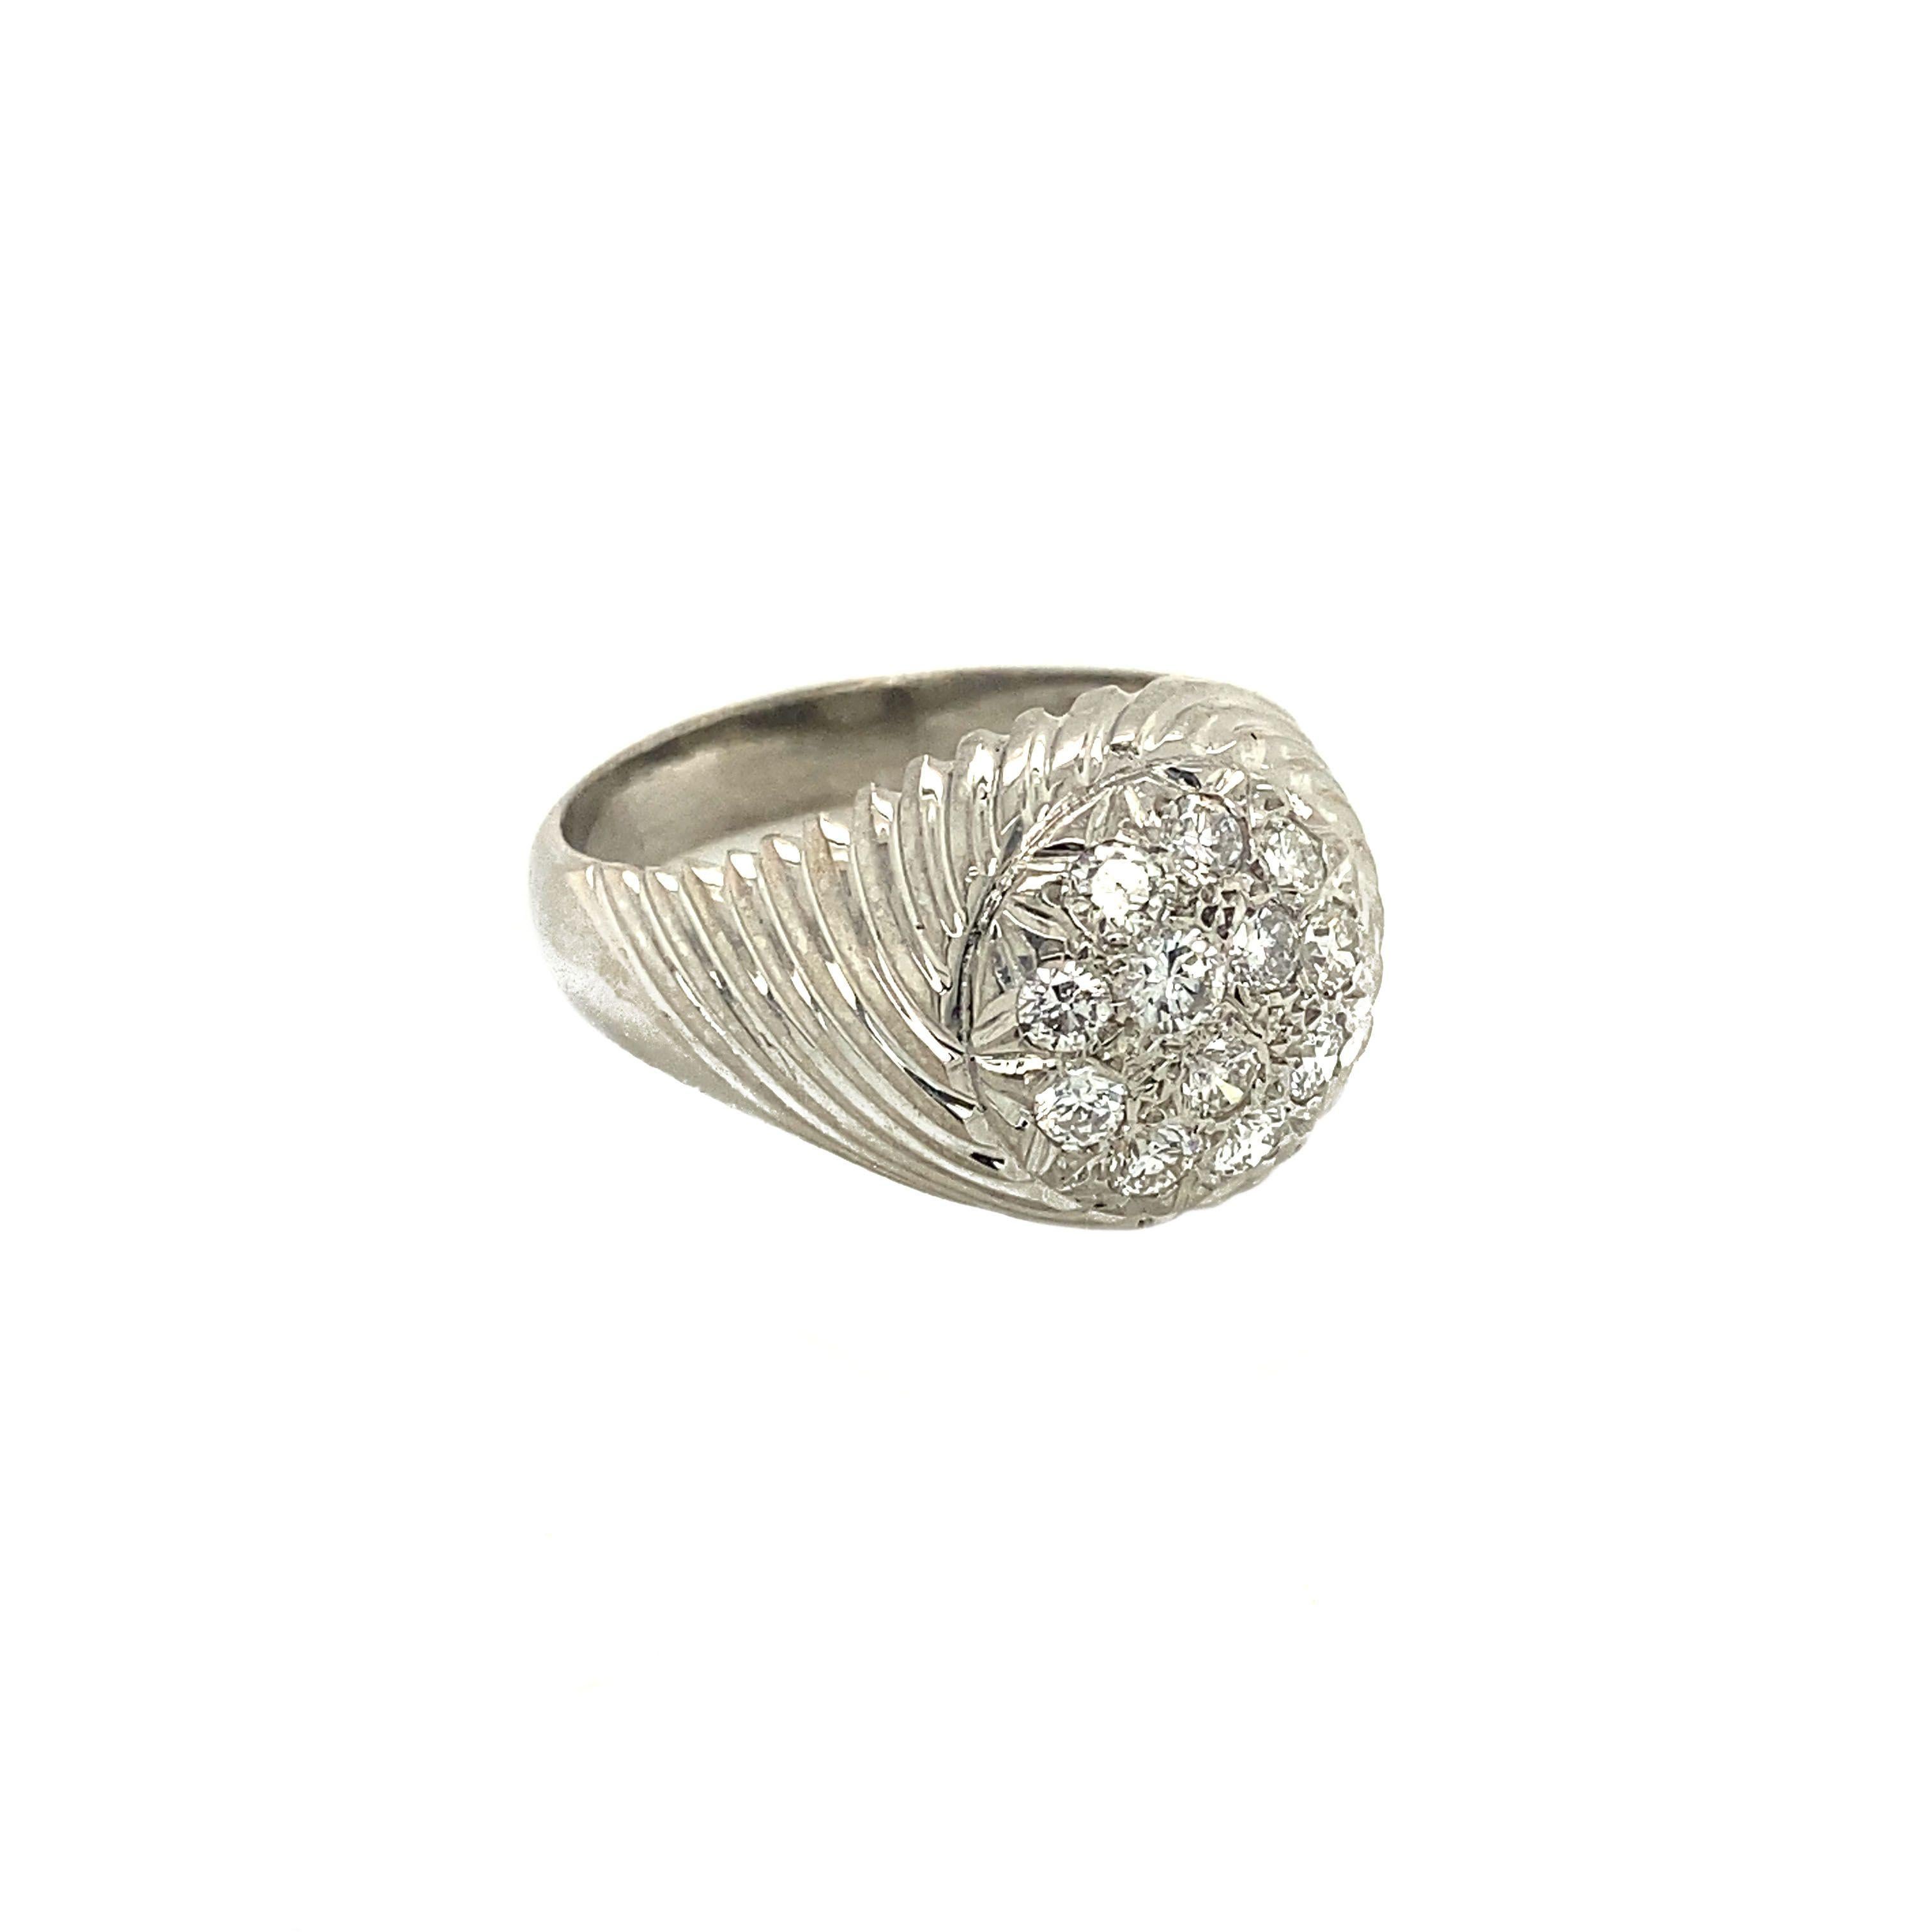 This 18 carat white gold mens ring is set with 12 diamonds of 0.08 ct. The ring size can be adjusted. 

Material: White gold
Quality: 18 carat
Round table diameter: 13.15 mm
diamond: 12x 0.08ct. brilliant cut G VSI
Shin width: 4.45 mm
Weight: 13.9